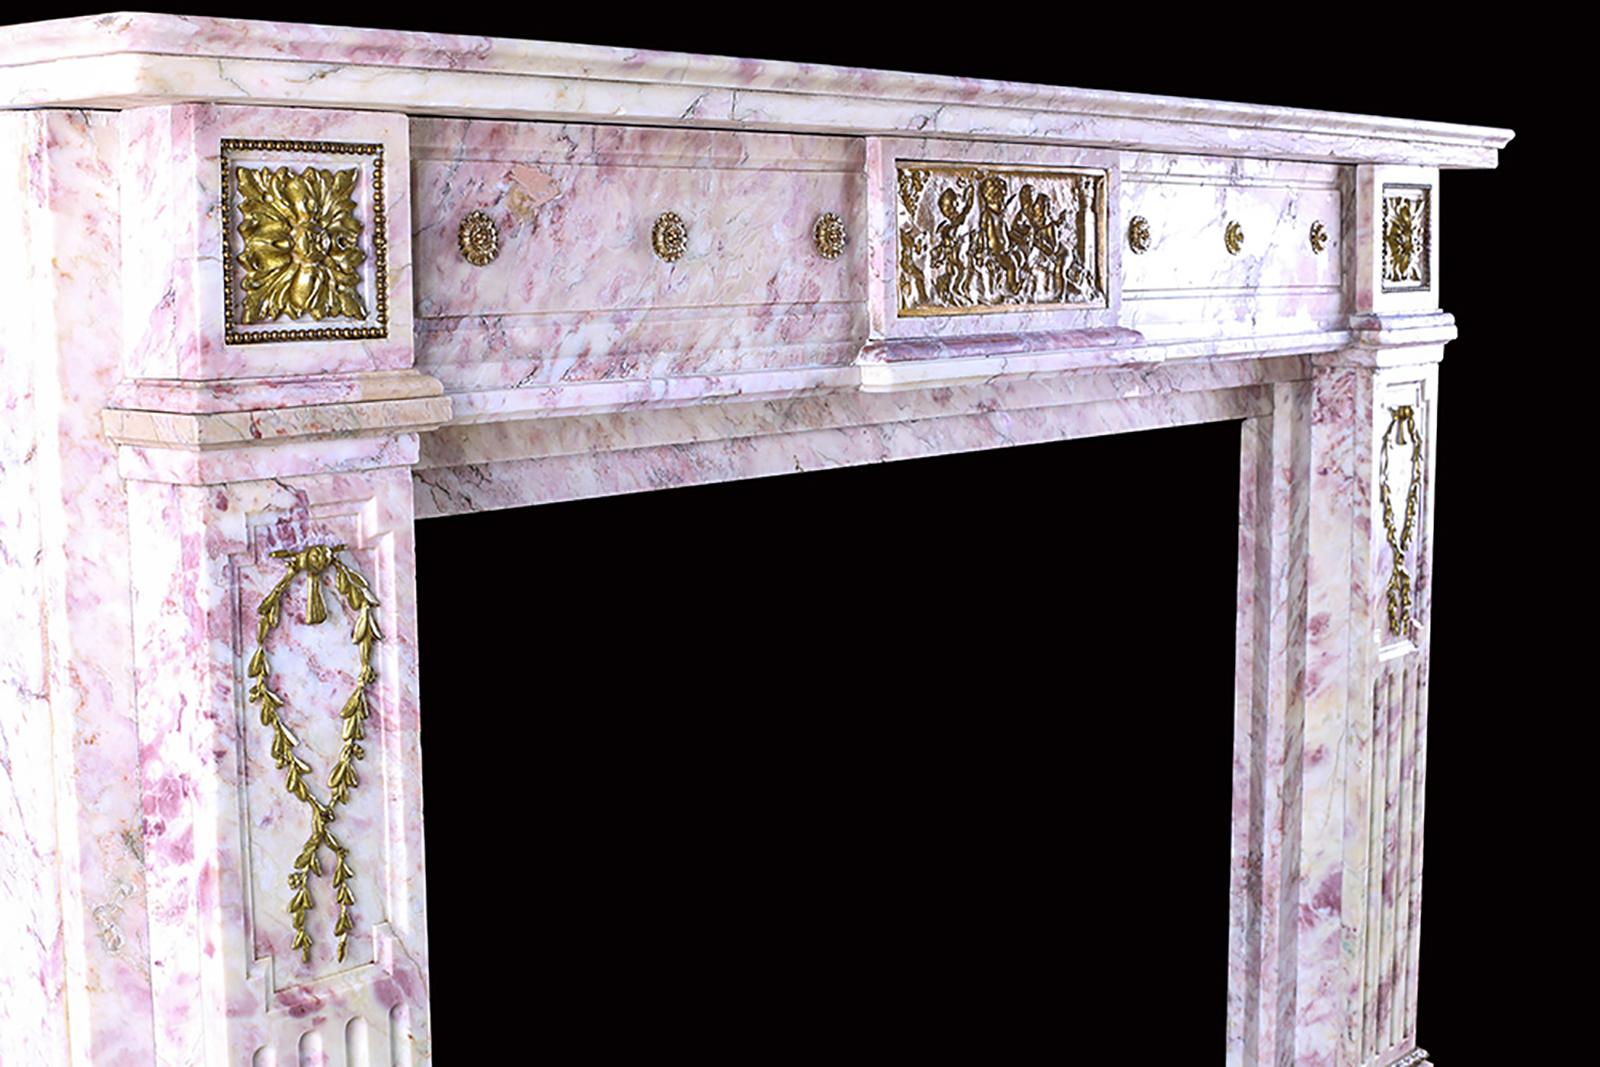 Hand-Carved Elegant Louis Xvi Style Fireplace Surround, French, Mid 19th Century For Sale